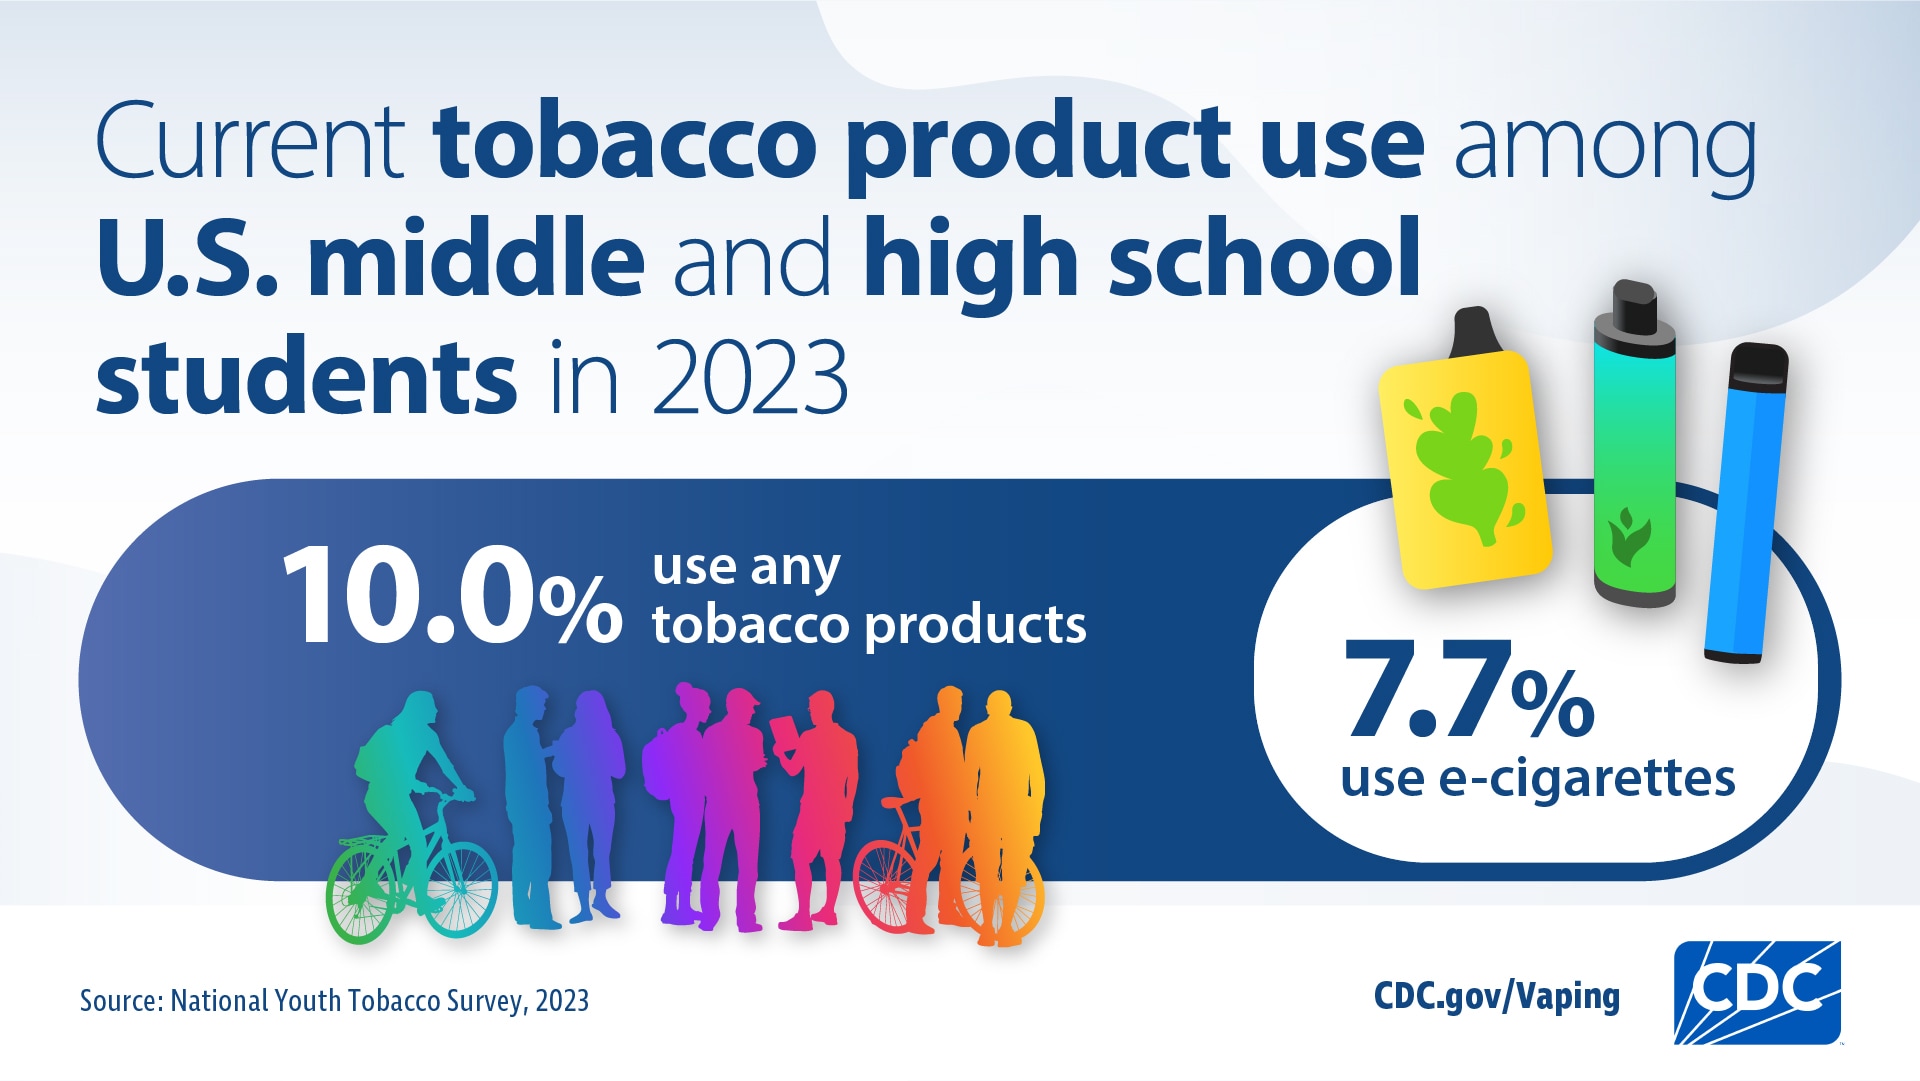 Visual depiction of the percentage of U.S. middle and high school students who use tobacco products and e-cigarettes